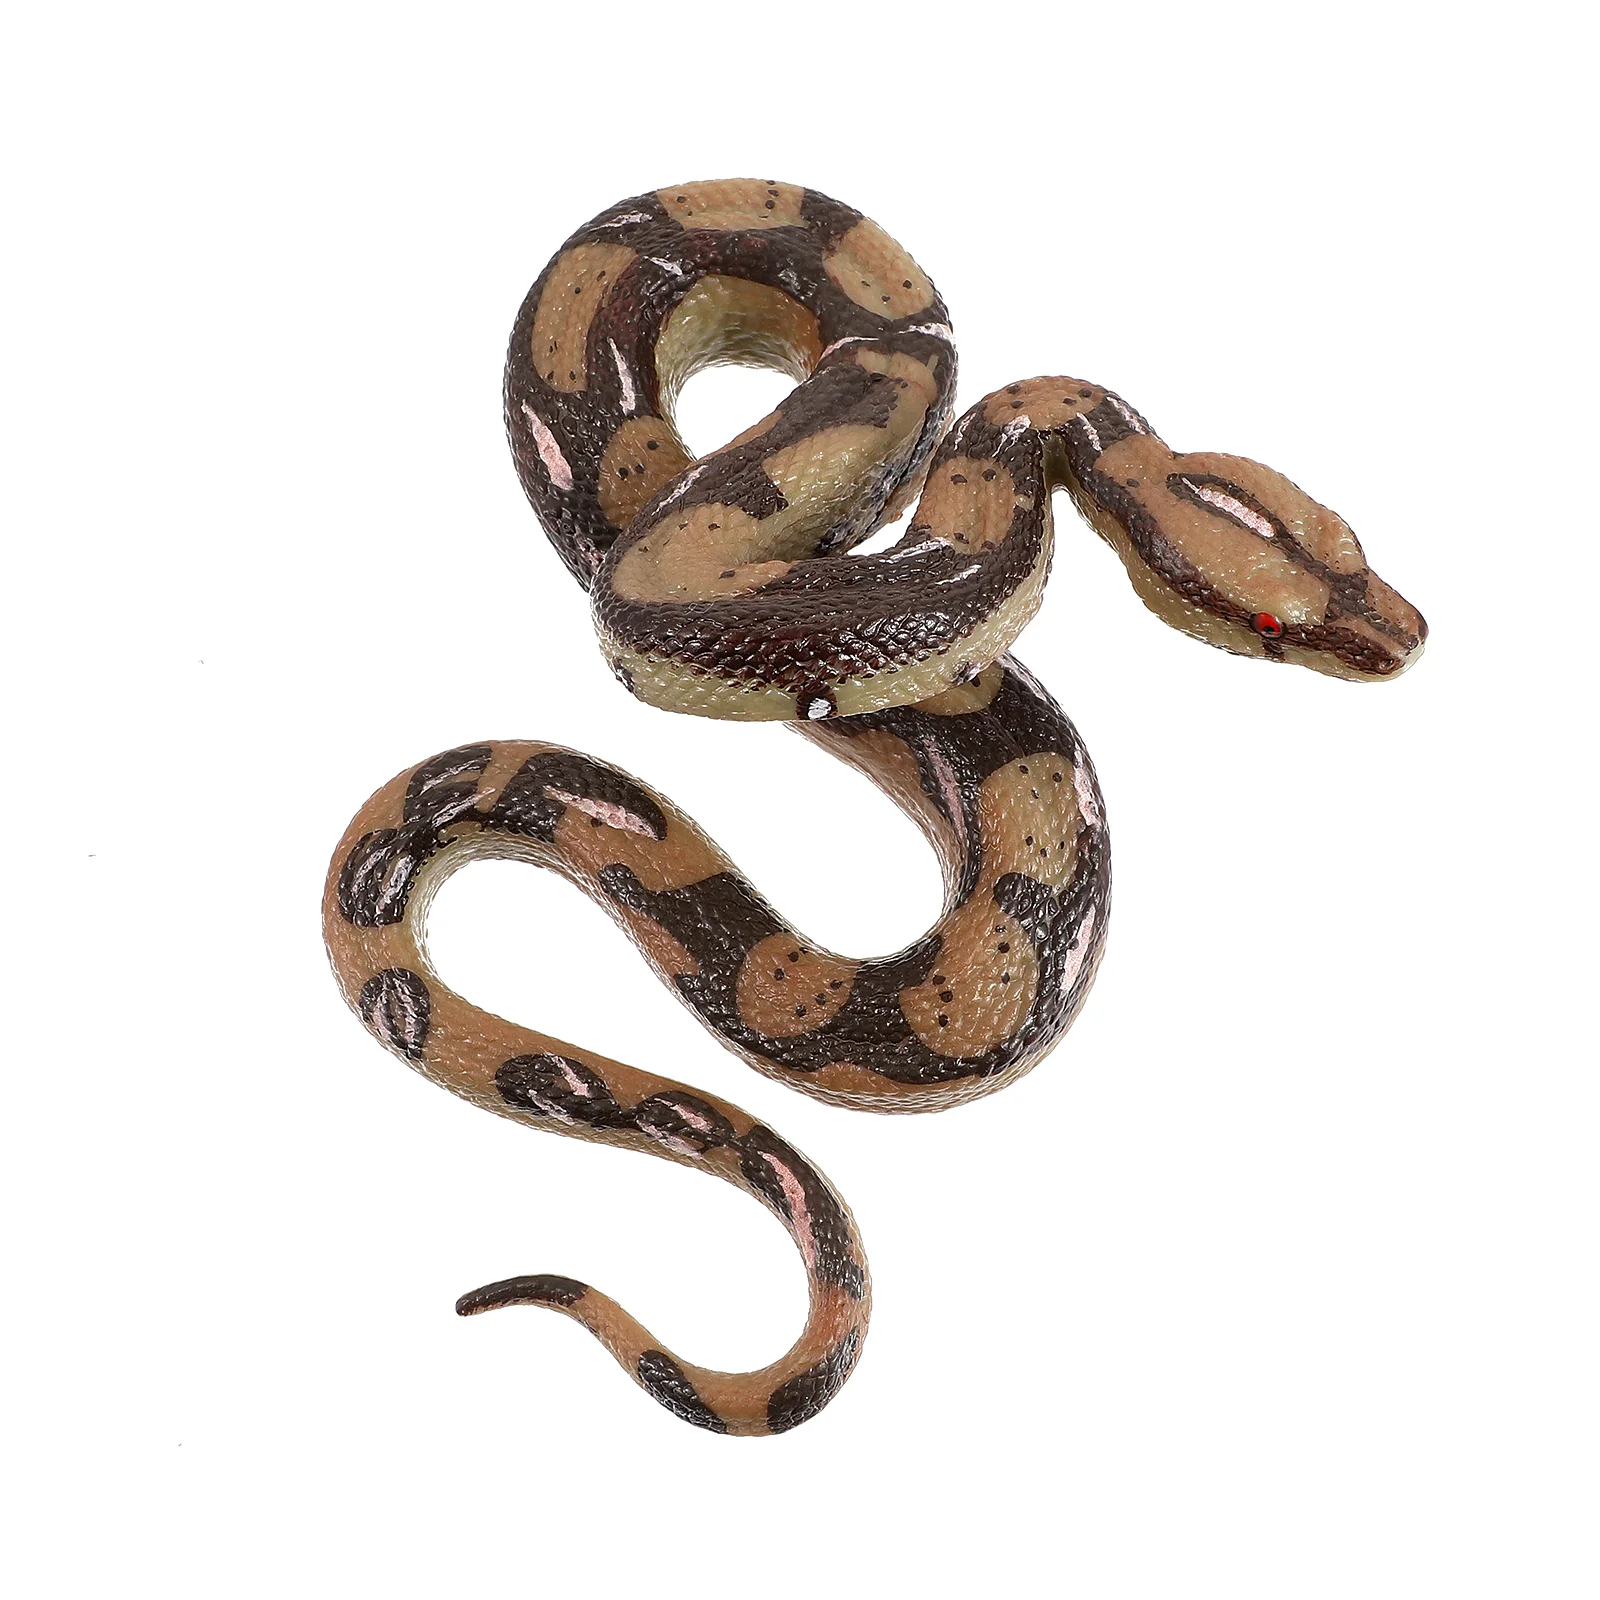 

Snake, Rubber Snakes Scary Stuff Simulated Snake Figurines for Party Favors Home Garden Decorating